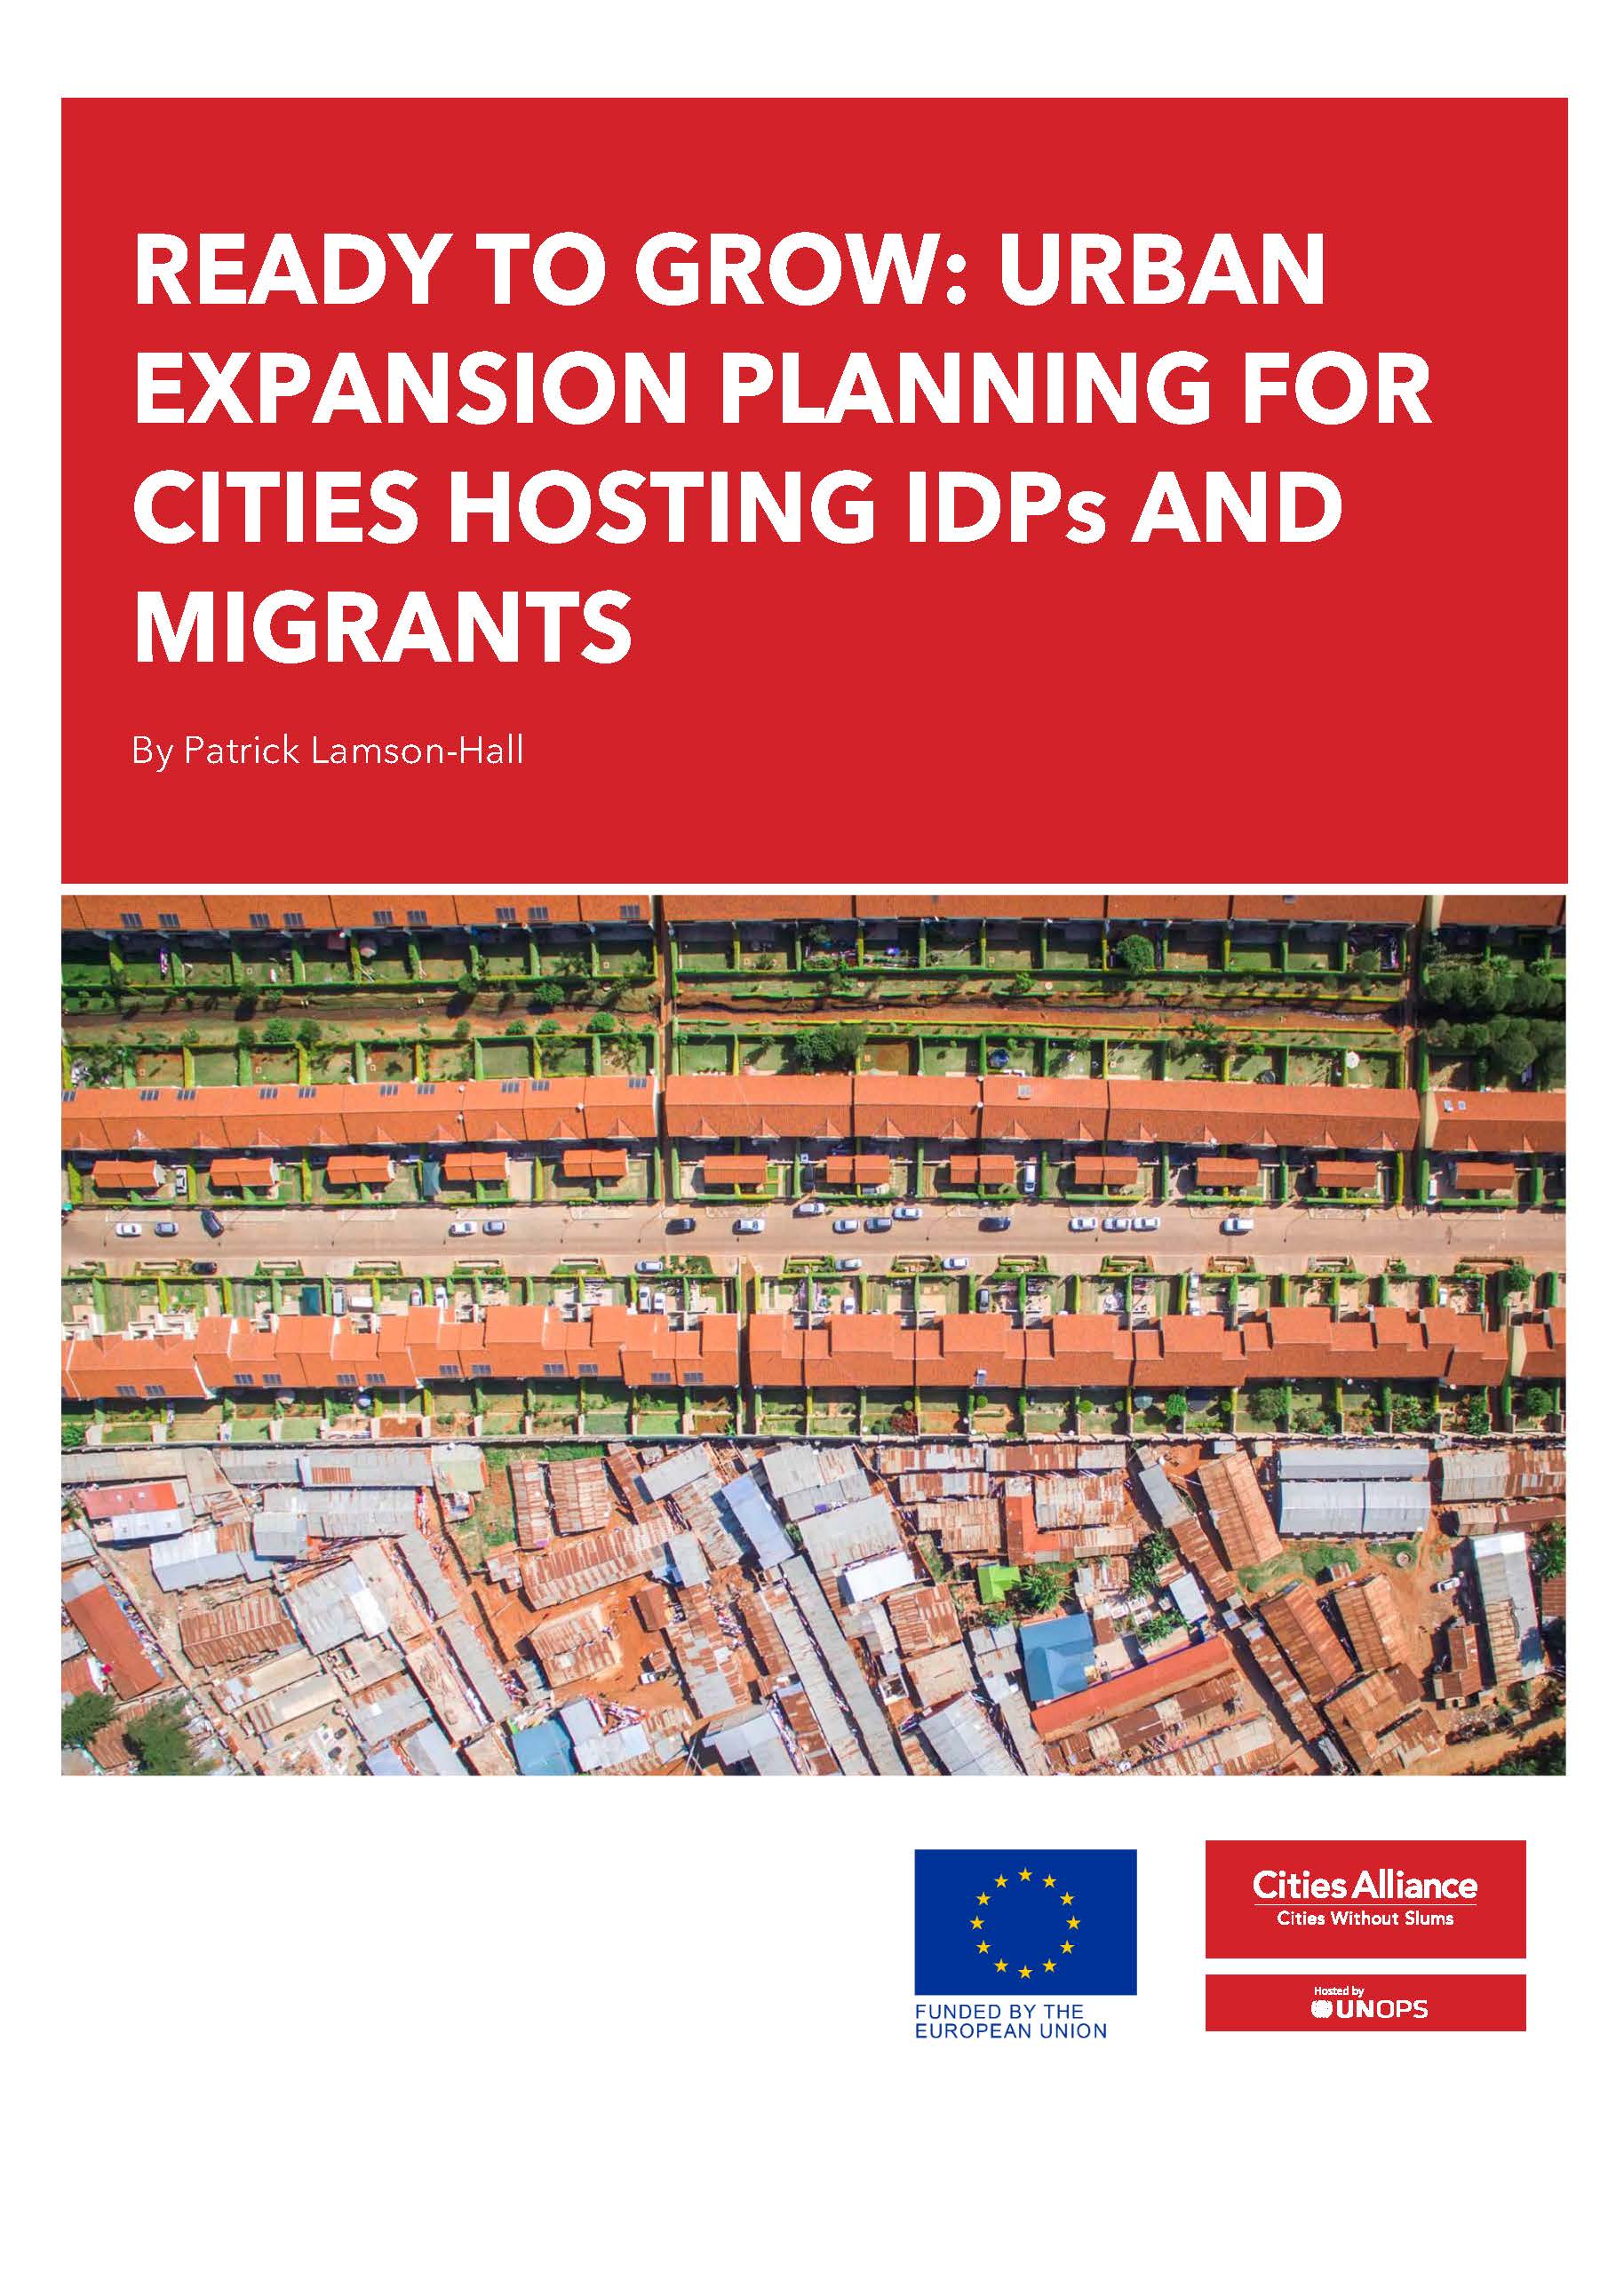 Citiesalliance Urban Expansion And Migrants Hosting Idps 2022 Cover 